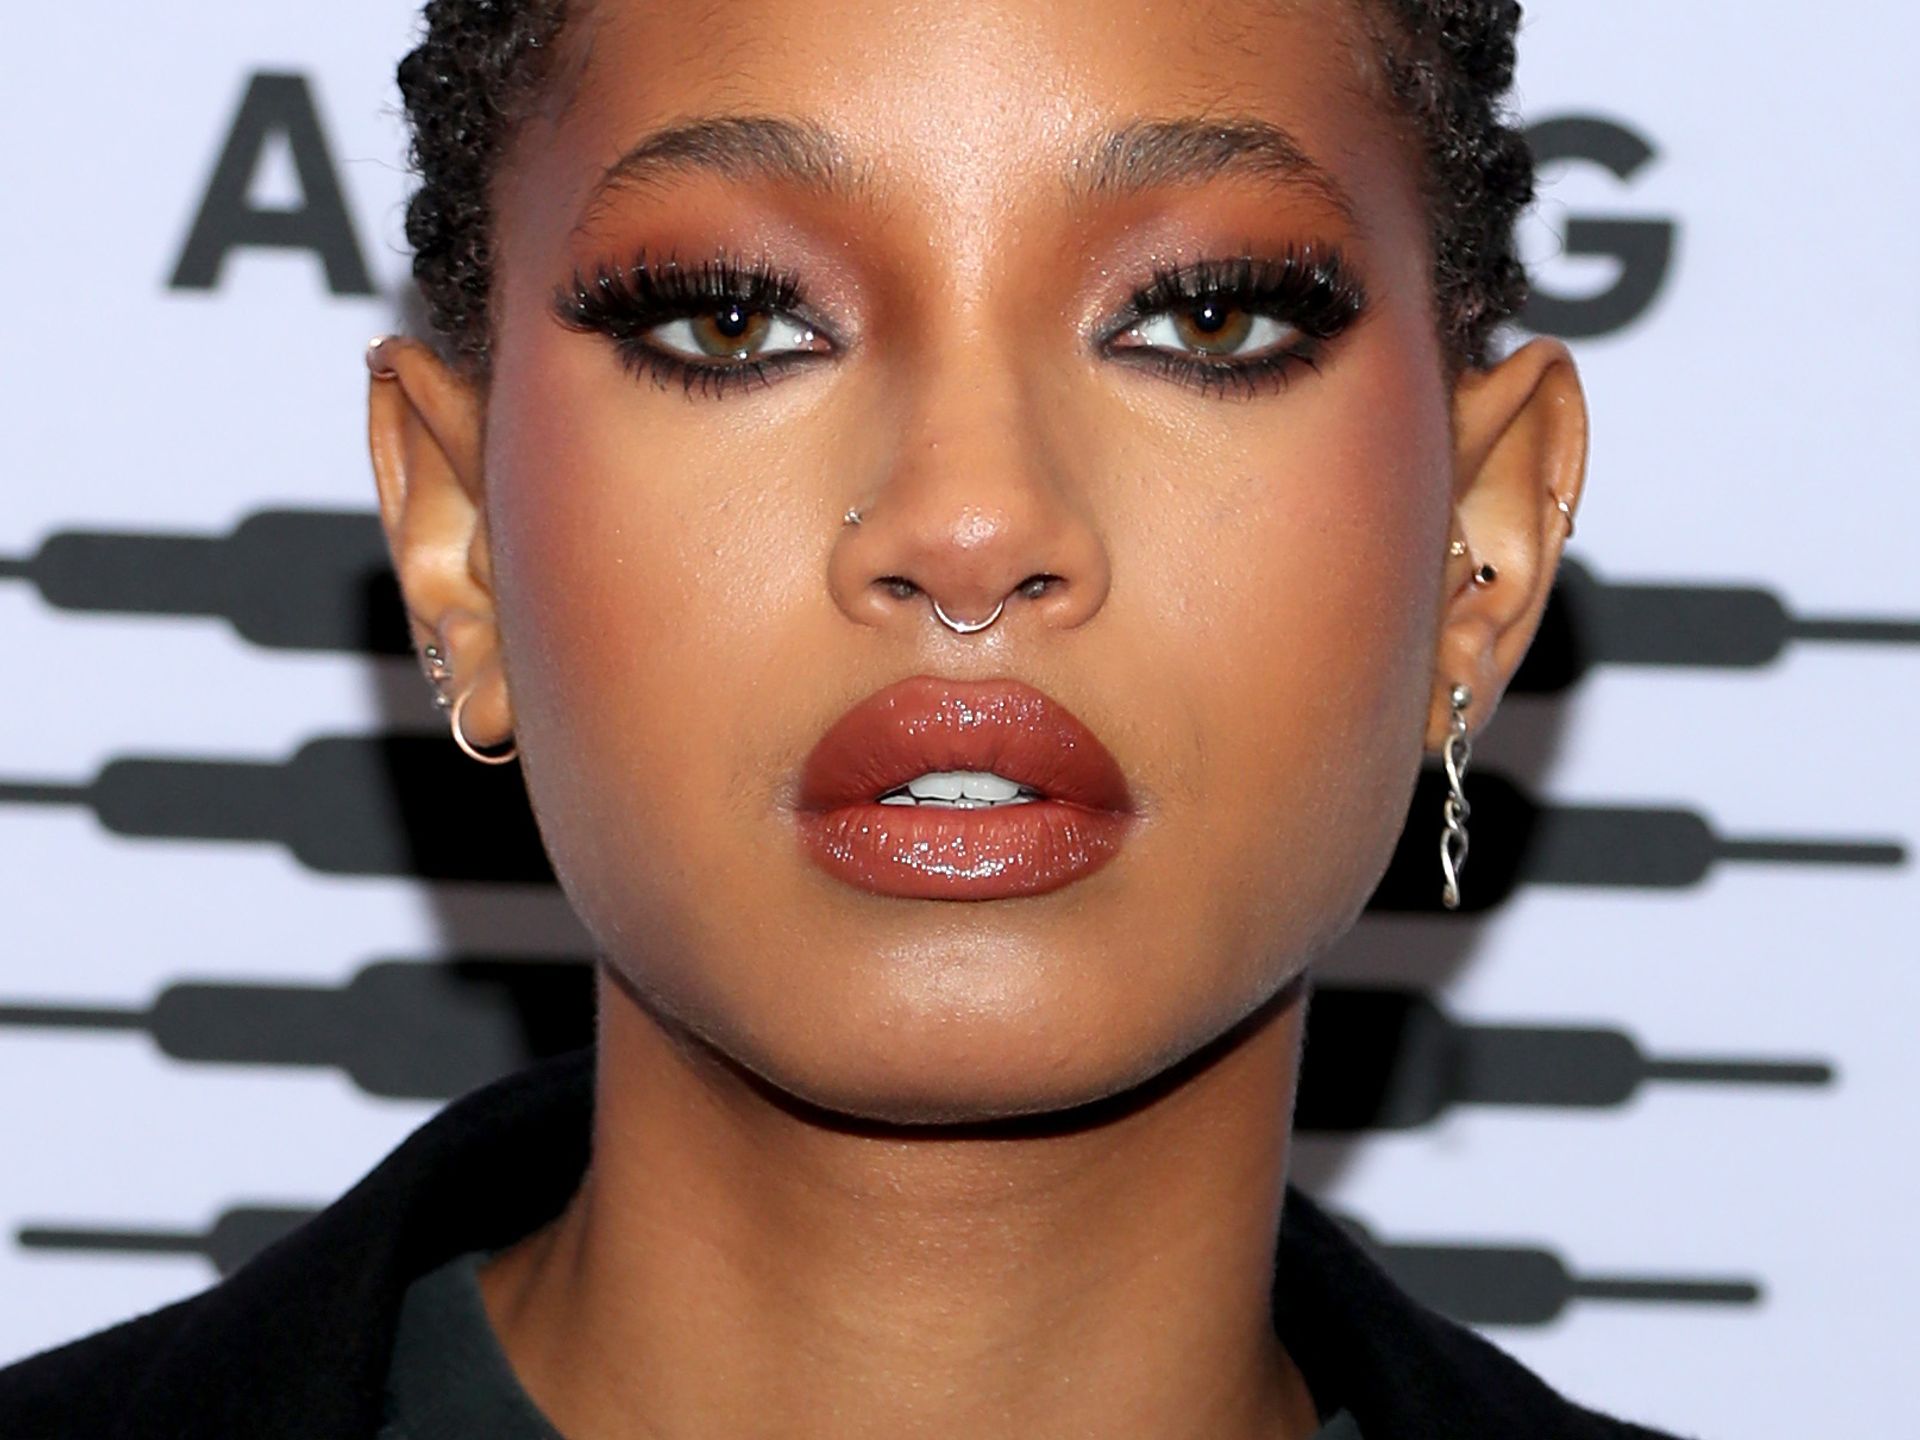 Will Smith's daughter Willow, son Jaden turn heads at star-studded